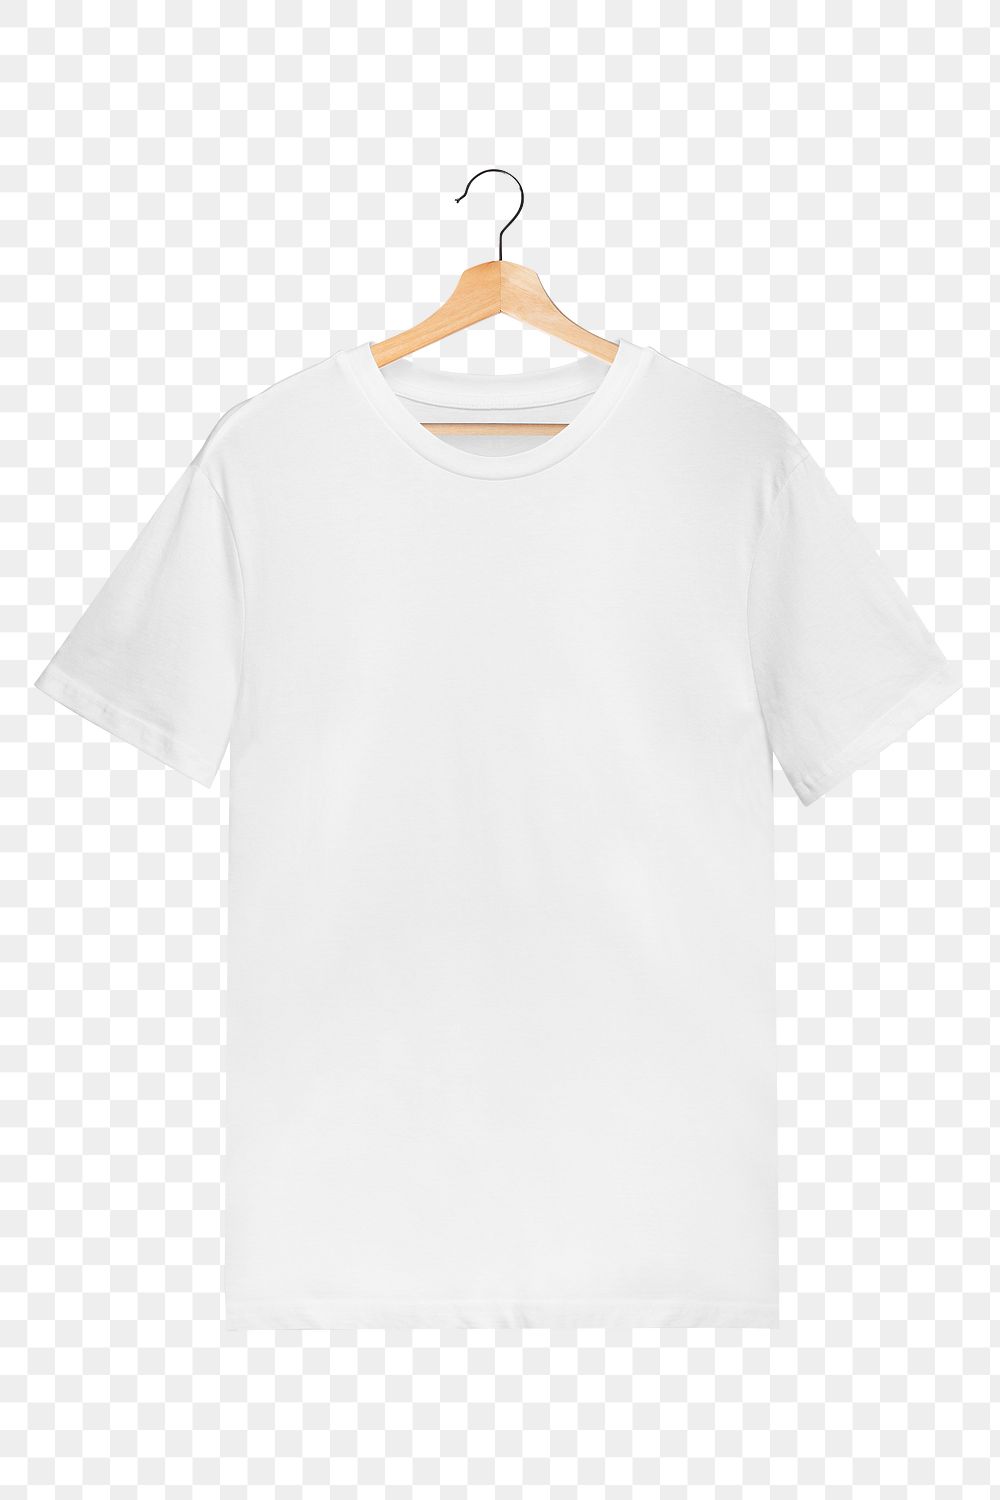 Png white t-shirt mockup on a wooden | Premium PNG Sticker - rawpixel